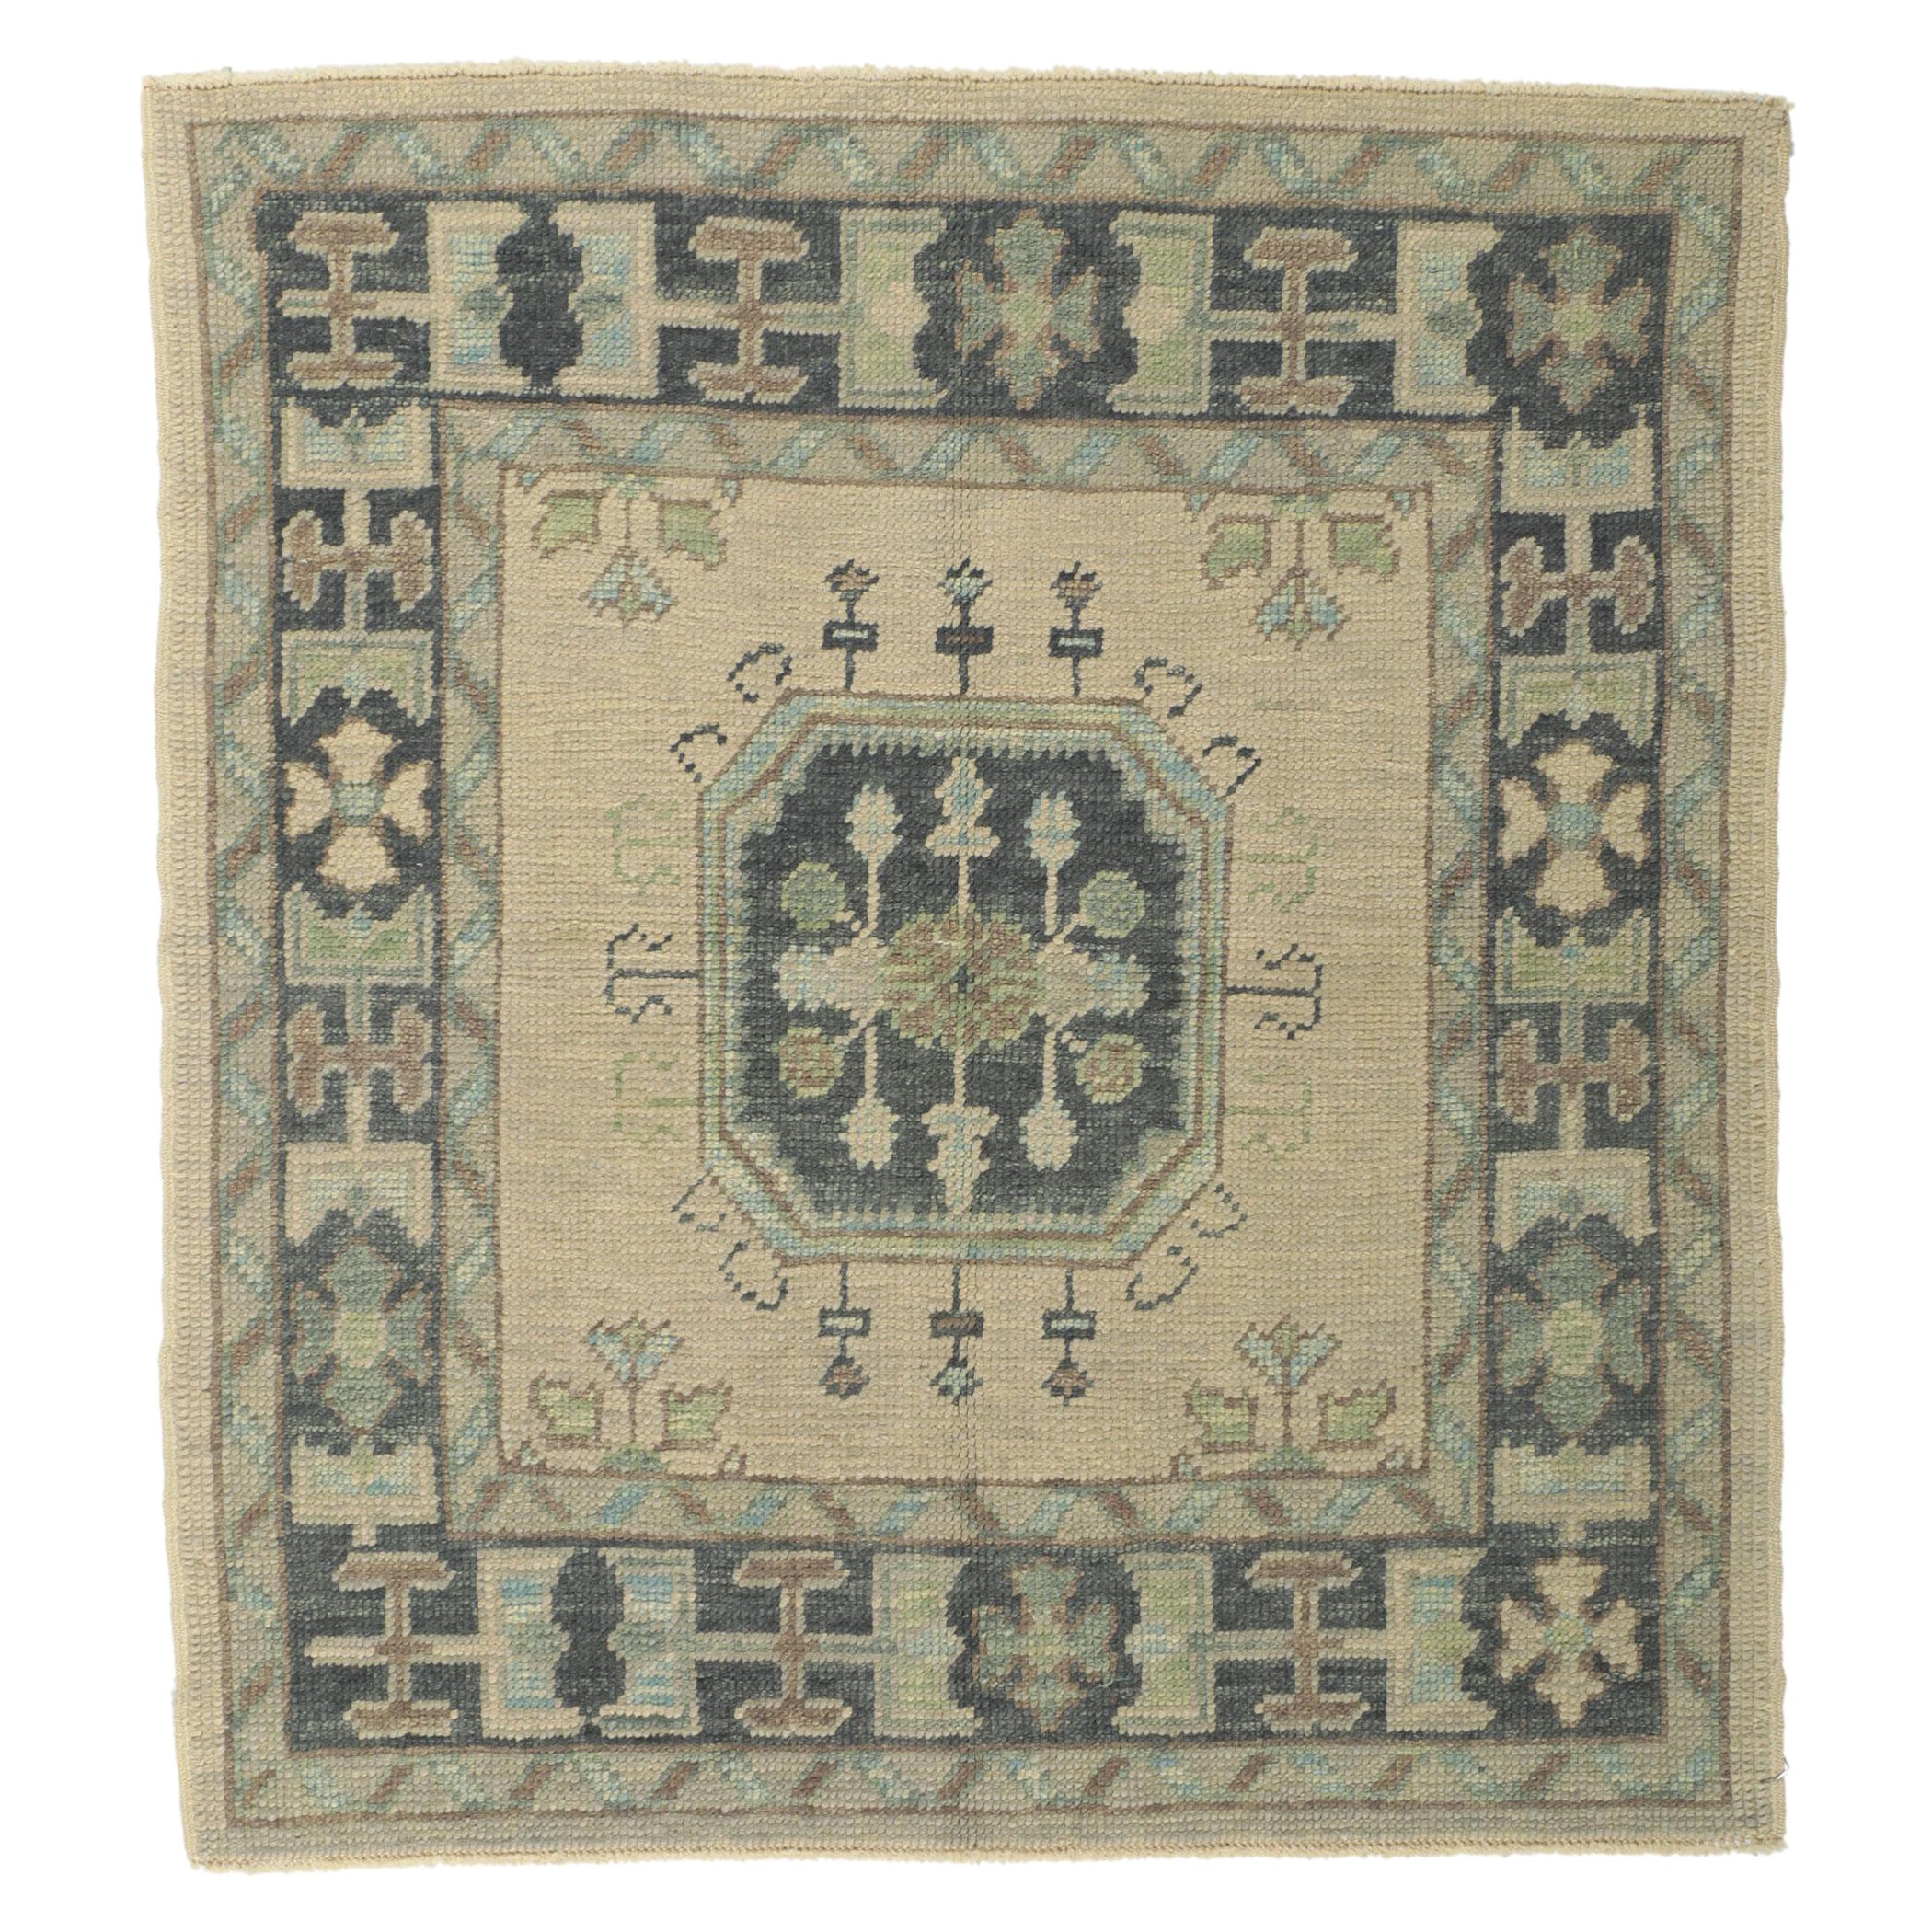 New Turkish Oushak Square Accent Rug with Modern Style